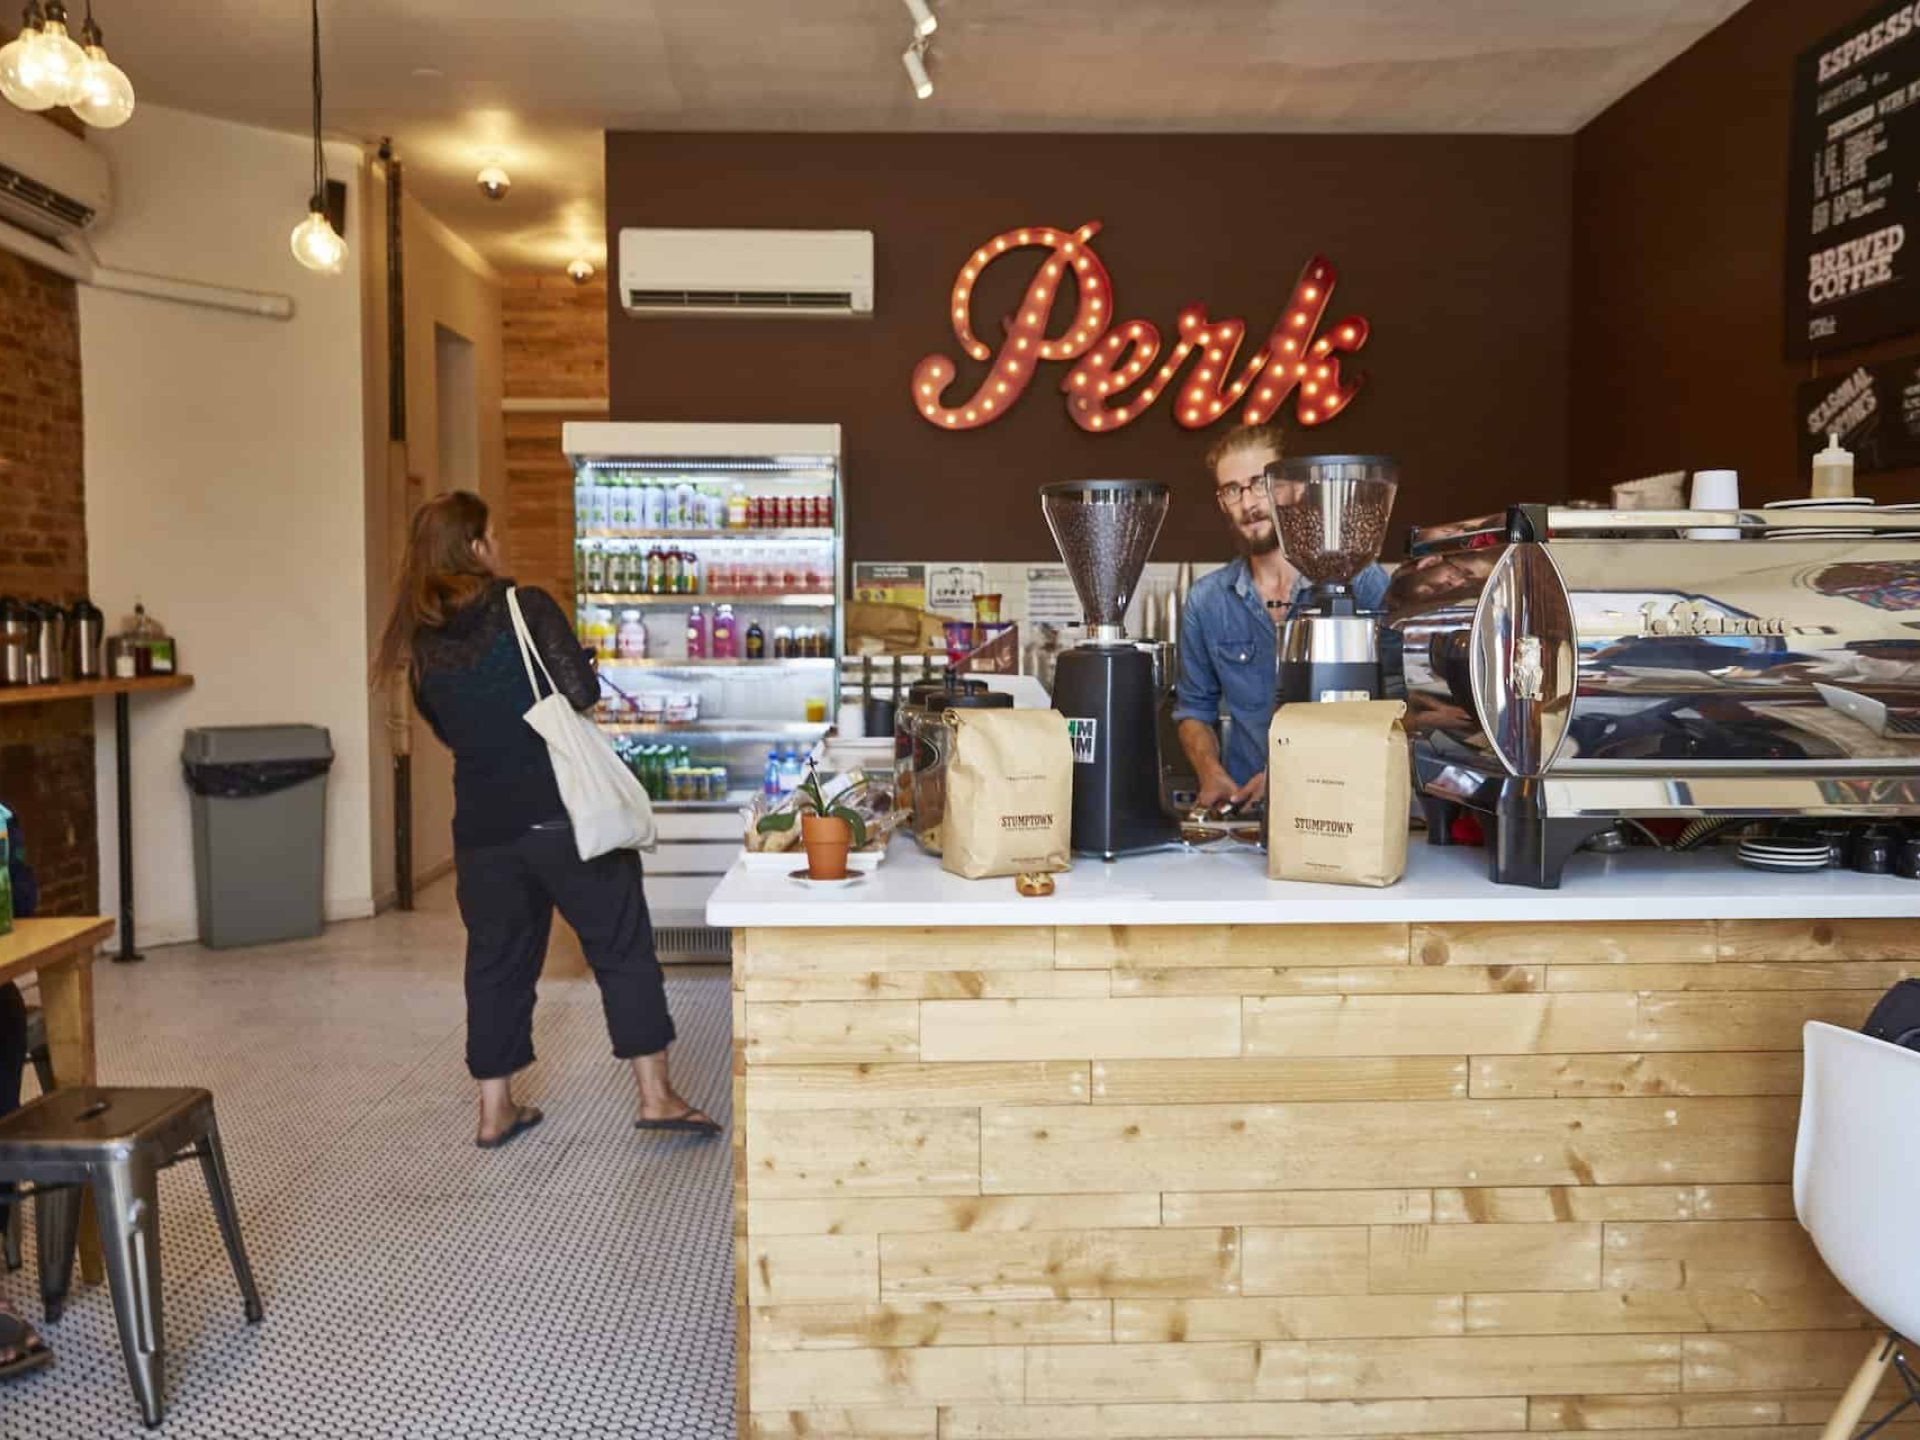 Interior of "Perk Coffee" shop with business sign on the back wall and a white L-shape counter with coffee and grinders.